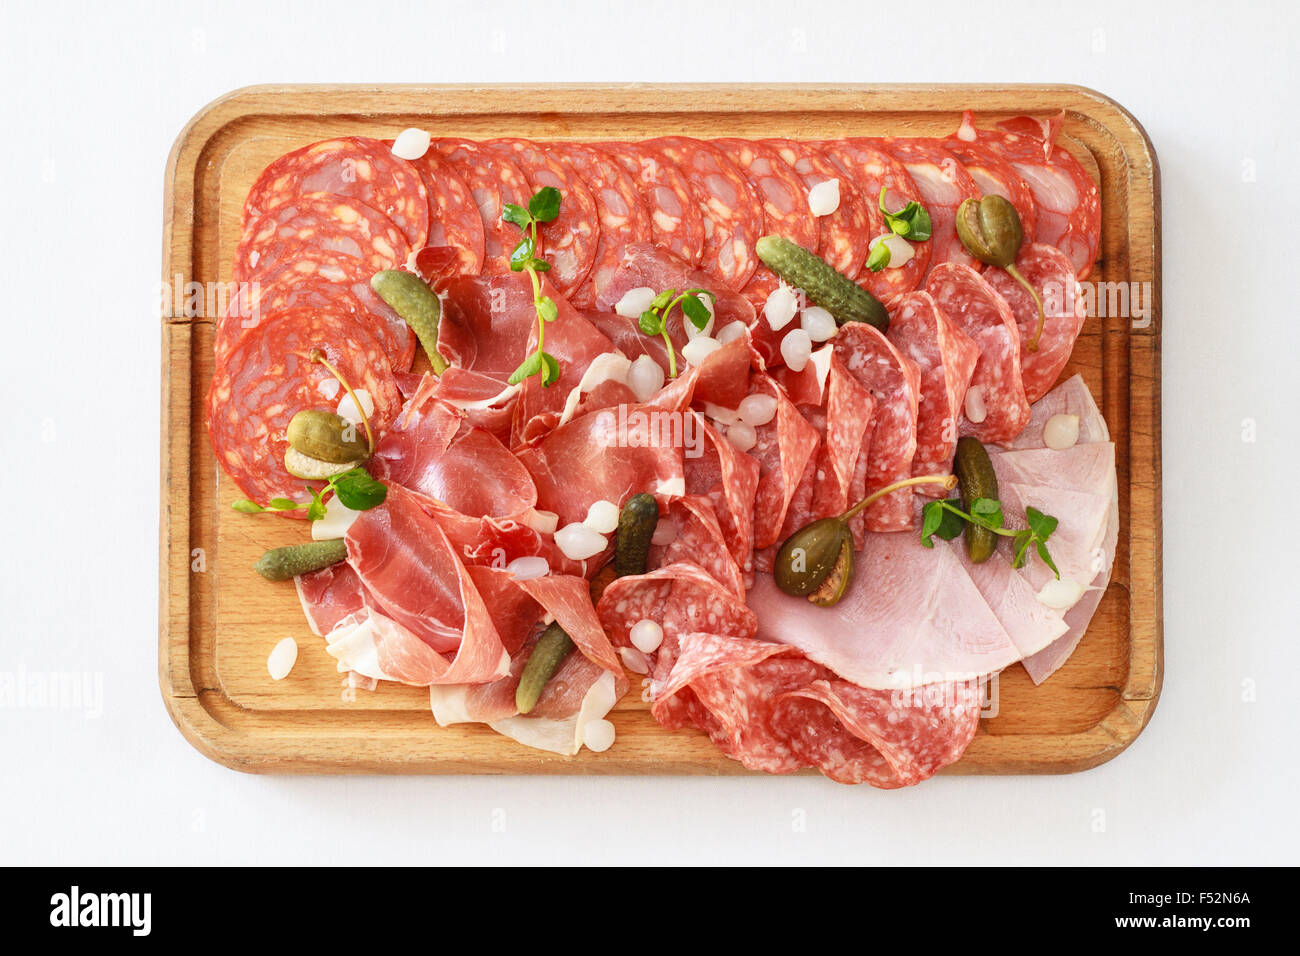 Top view of Charcuterie board - A platter of ham & bacon slices with pickles on a wooden board Stock Photo